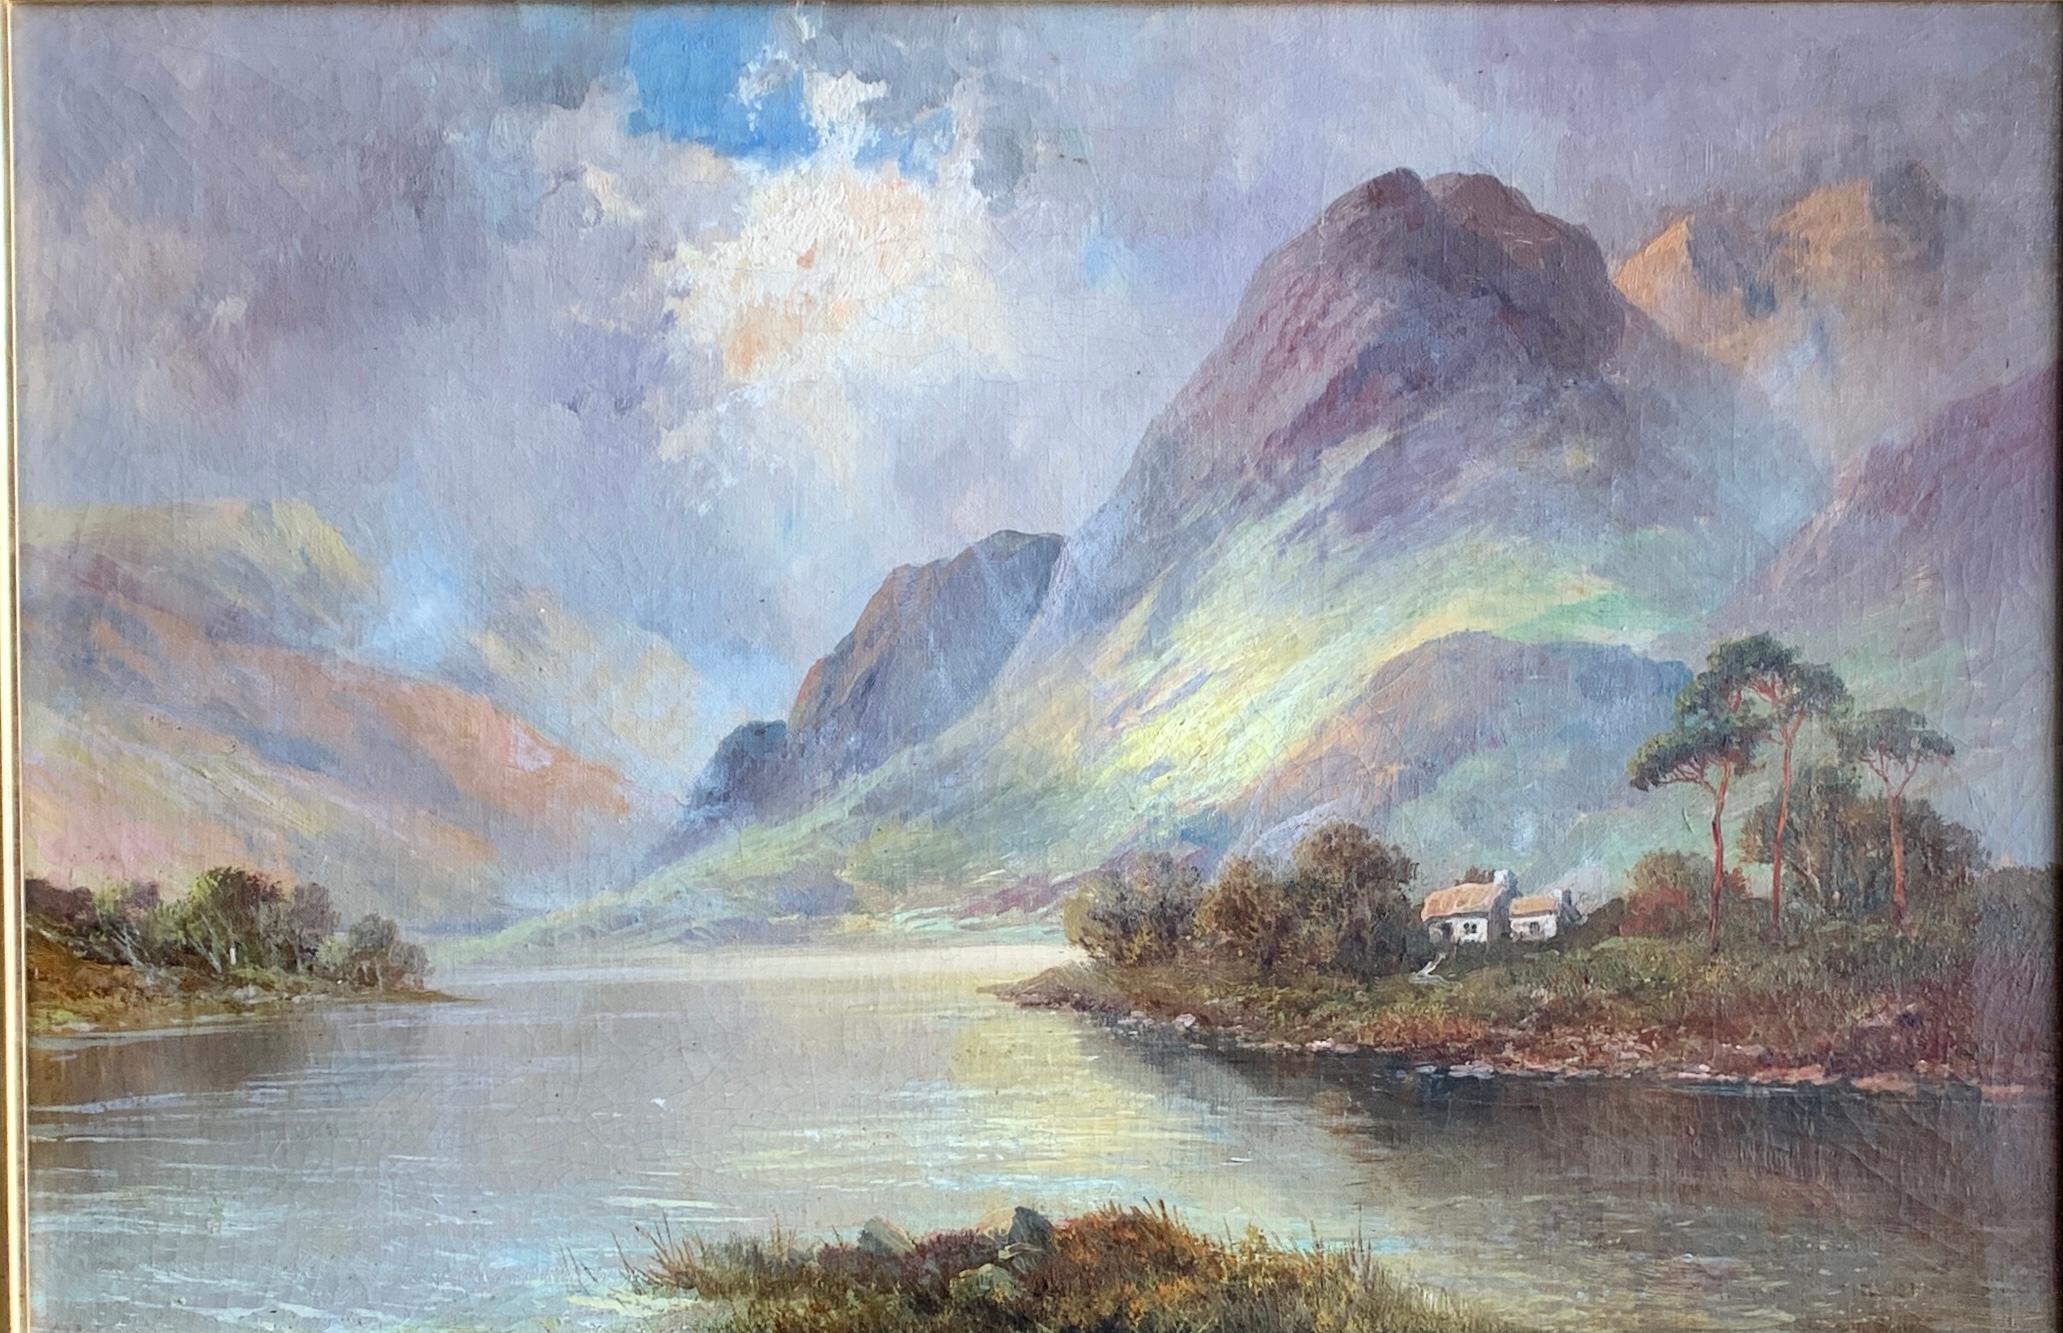 Antique Scottish Highland Loch landscape, with sunlit streaming onto the water - Painting by Francis E. Jamieson